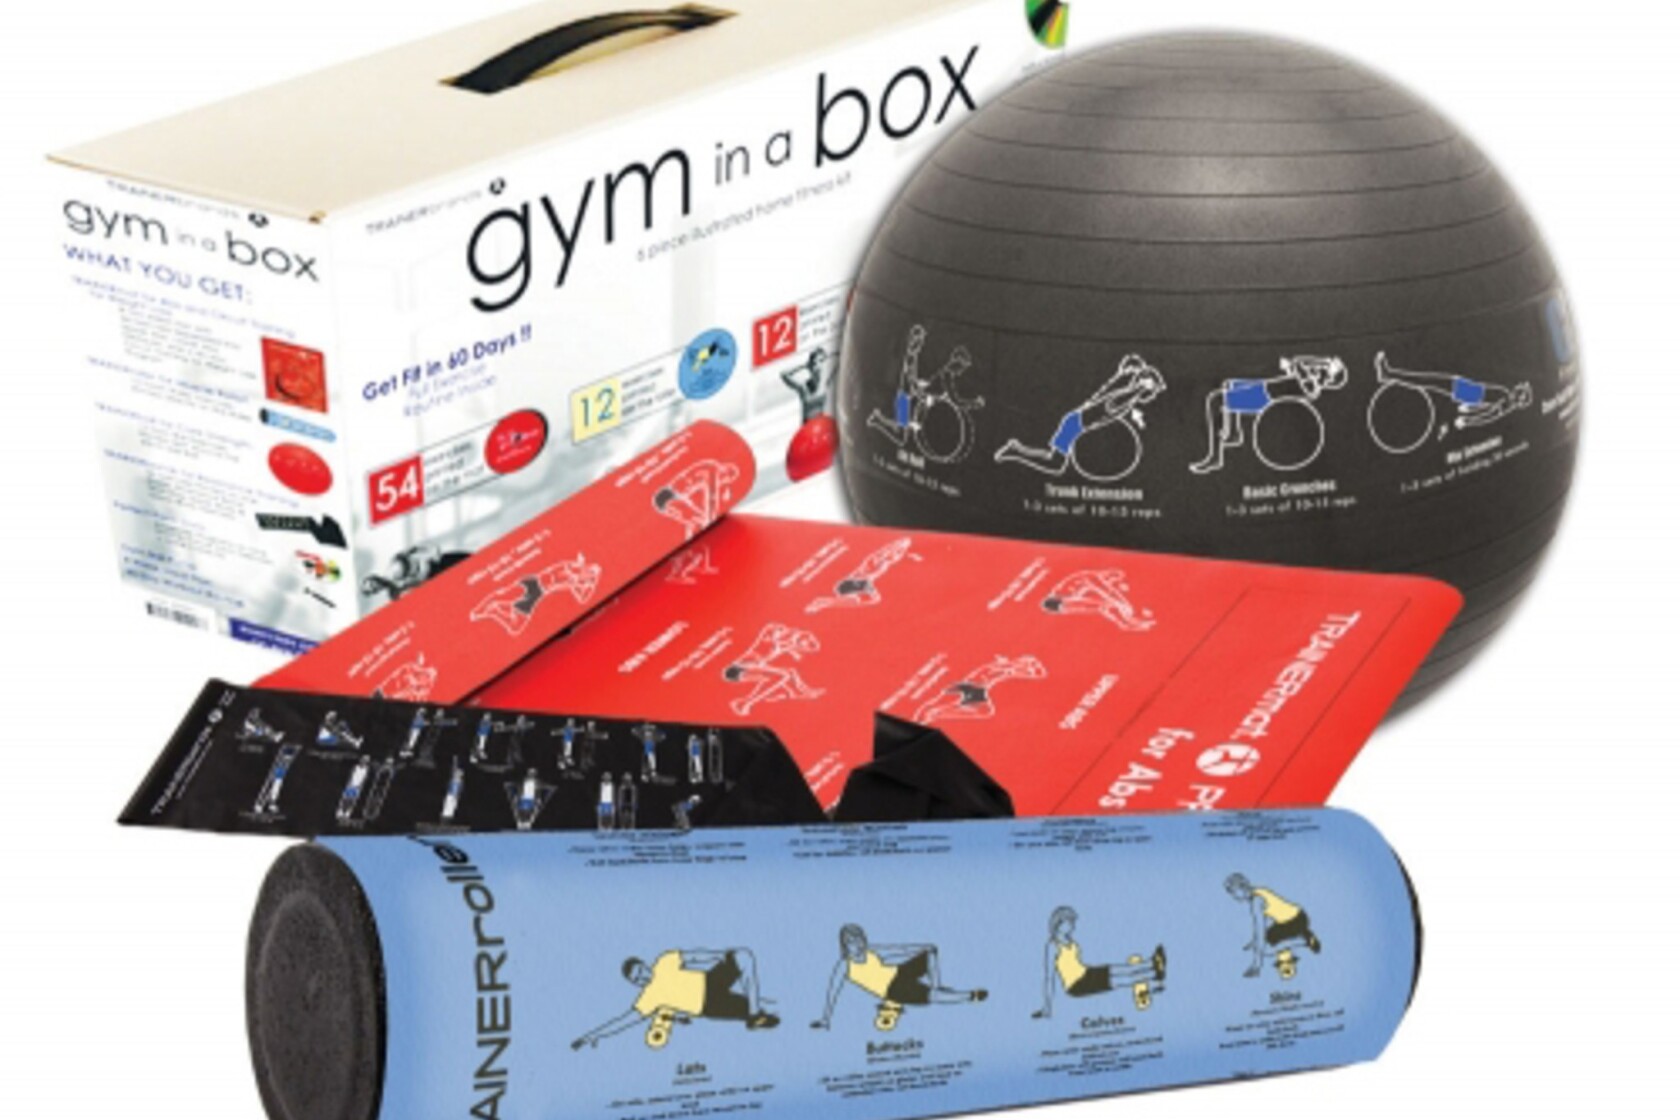 Compact Exercise Aids That Work For Dorm Room Workouts Los